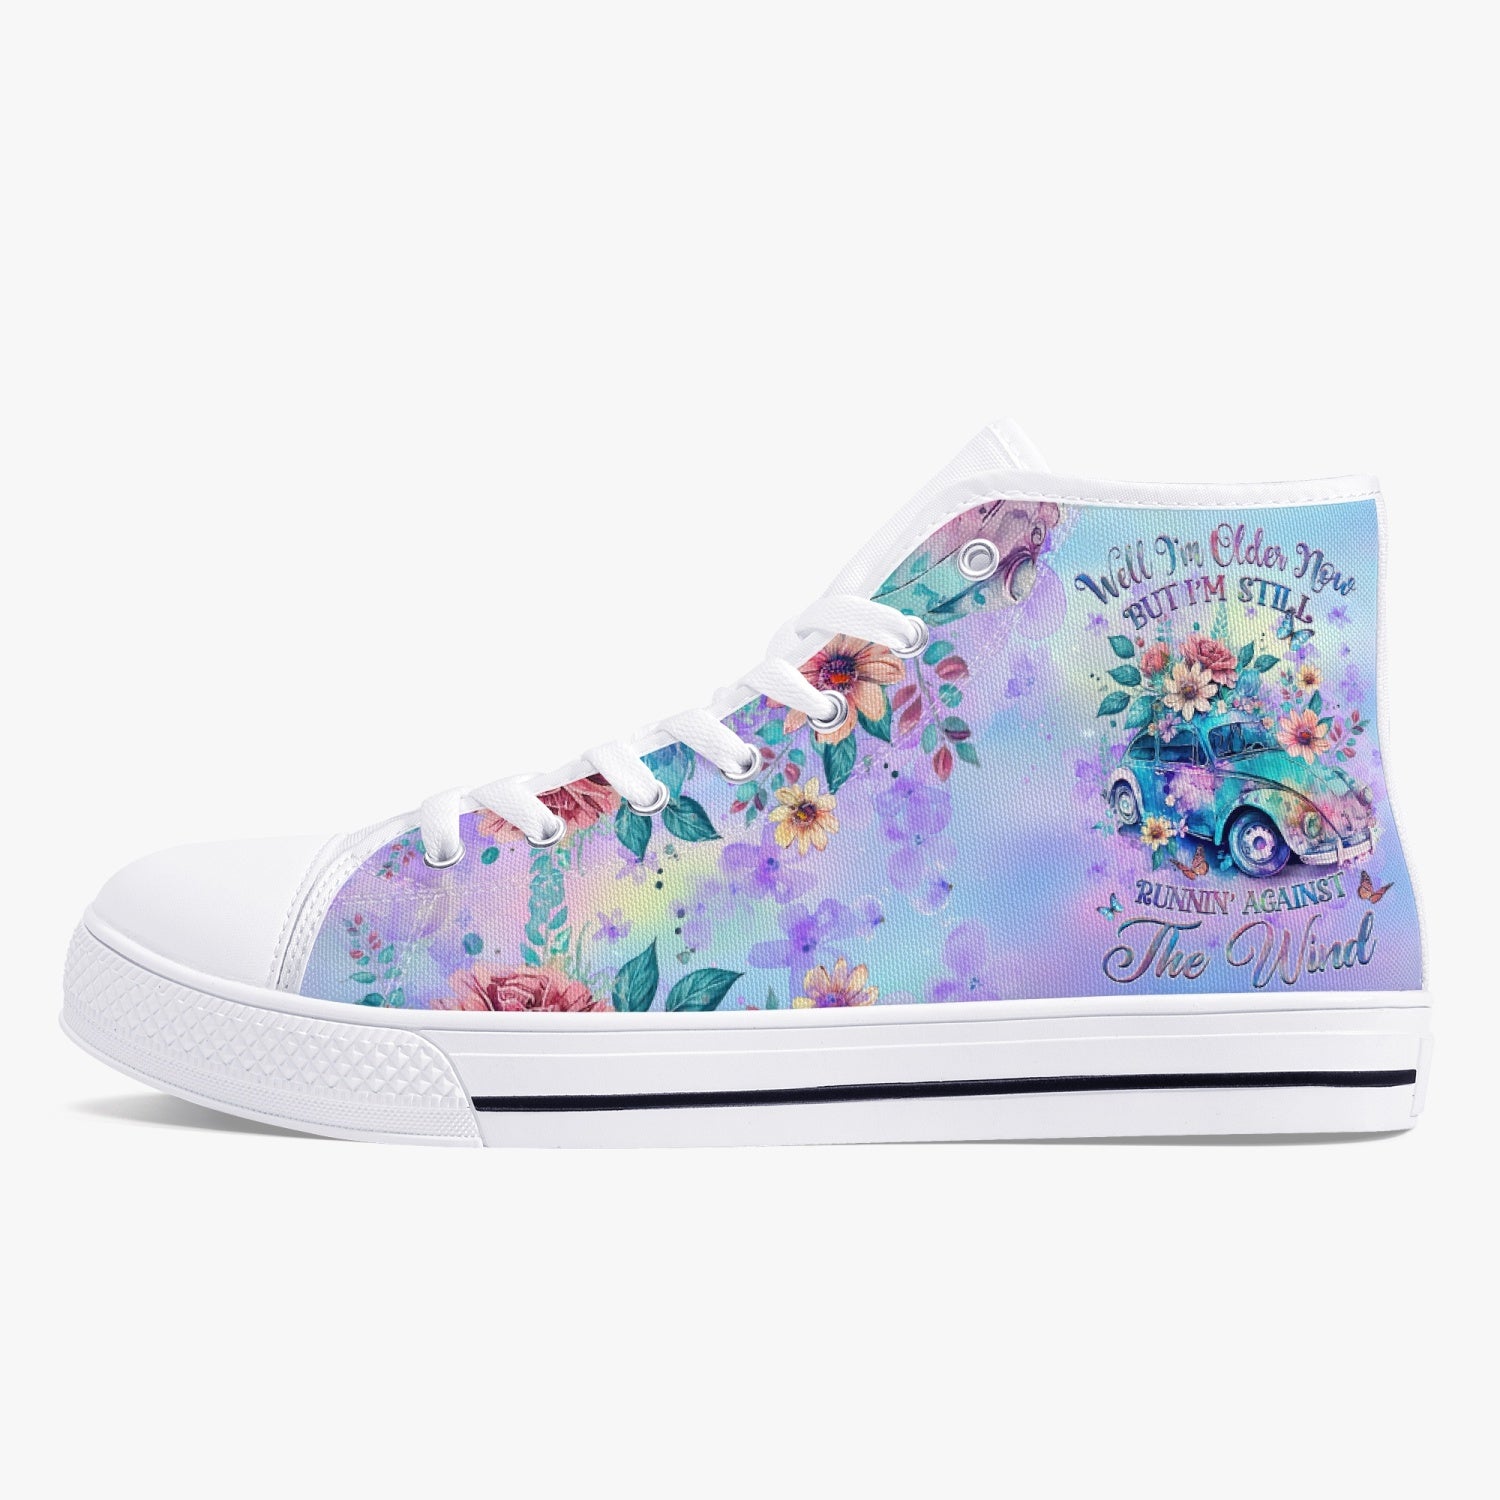 RUNNING AGAINST THE WIND HIGH TOP CANVAS SHOES - YHHG0410232